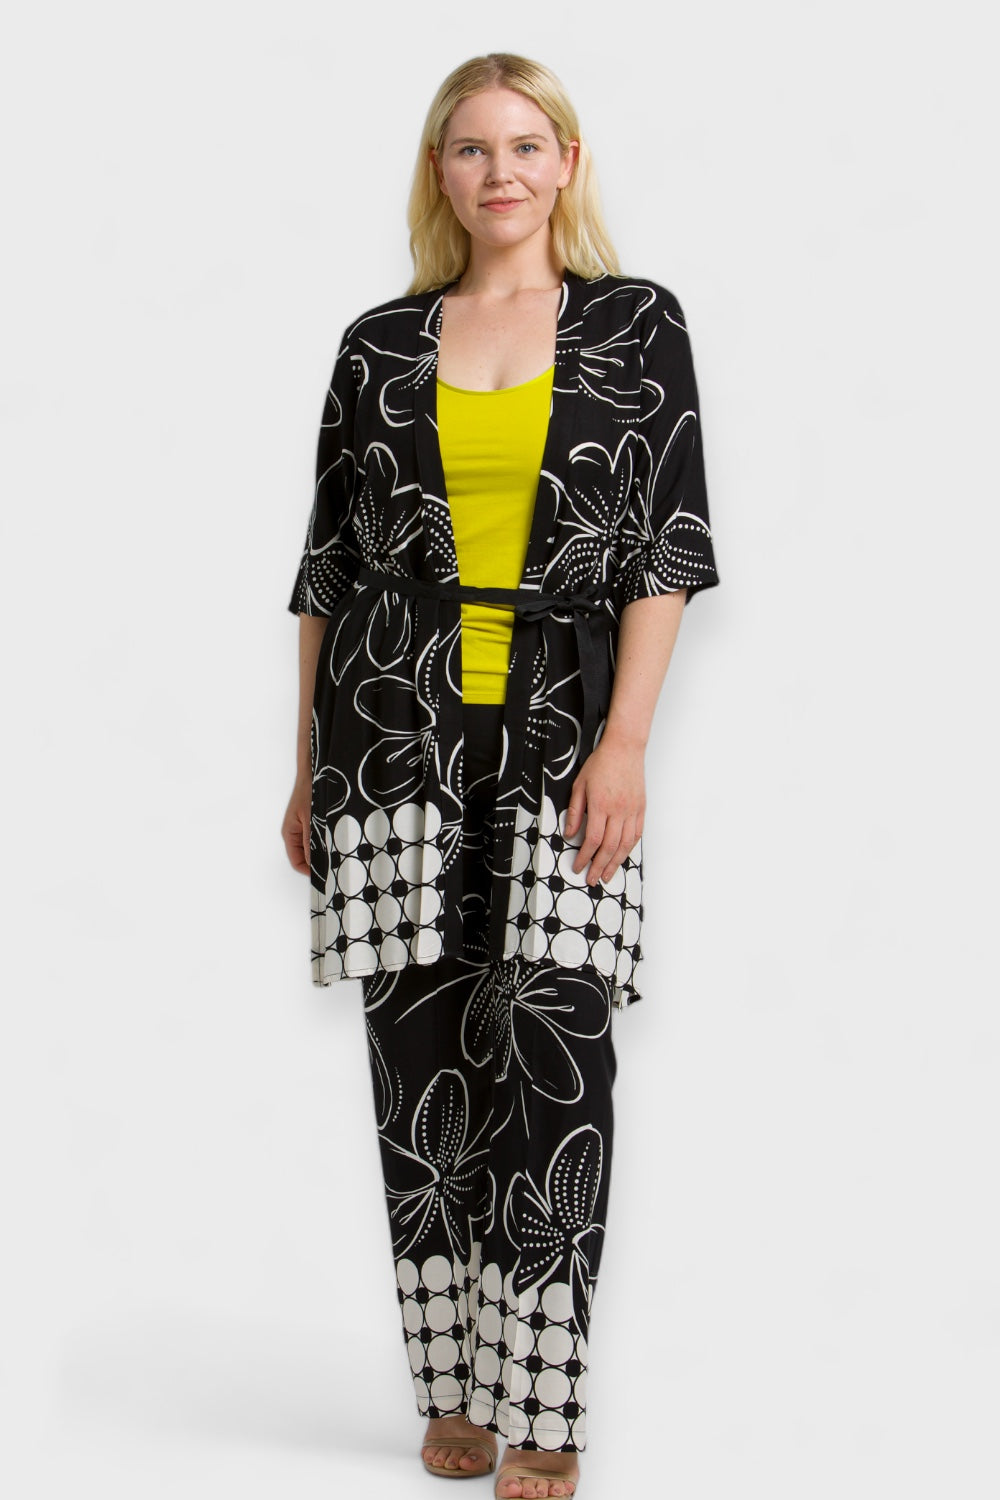 Ava Plus Size Black & White Floral Print Belted Duster Cardigan by Oltretempo Italian Women's Clothing Paired with Ava Floral Pants